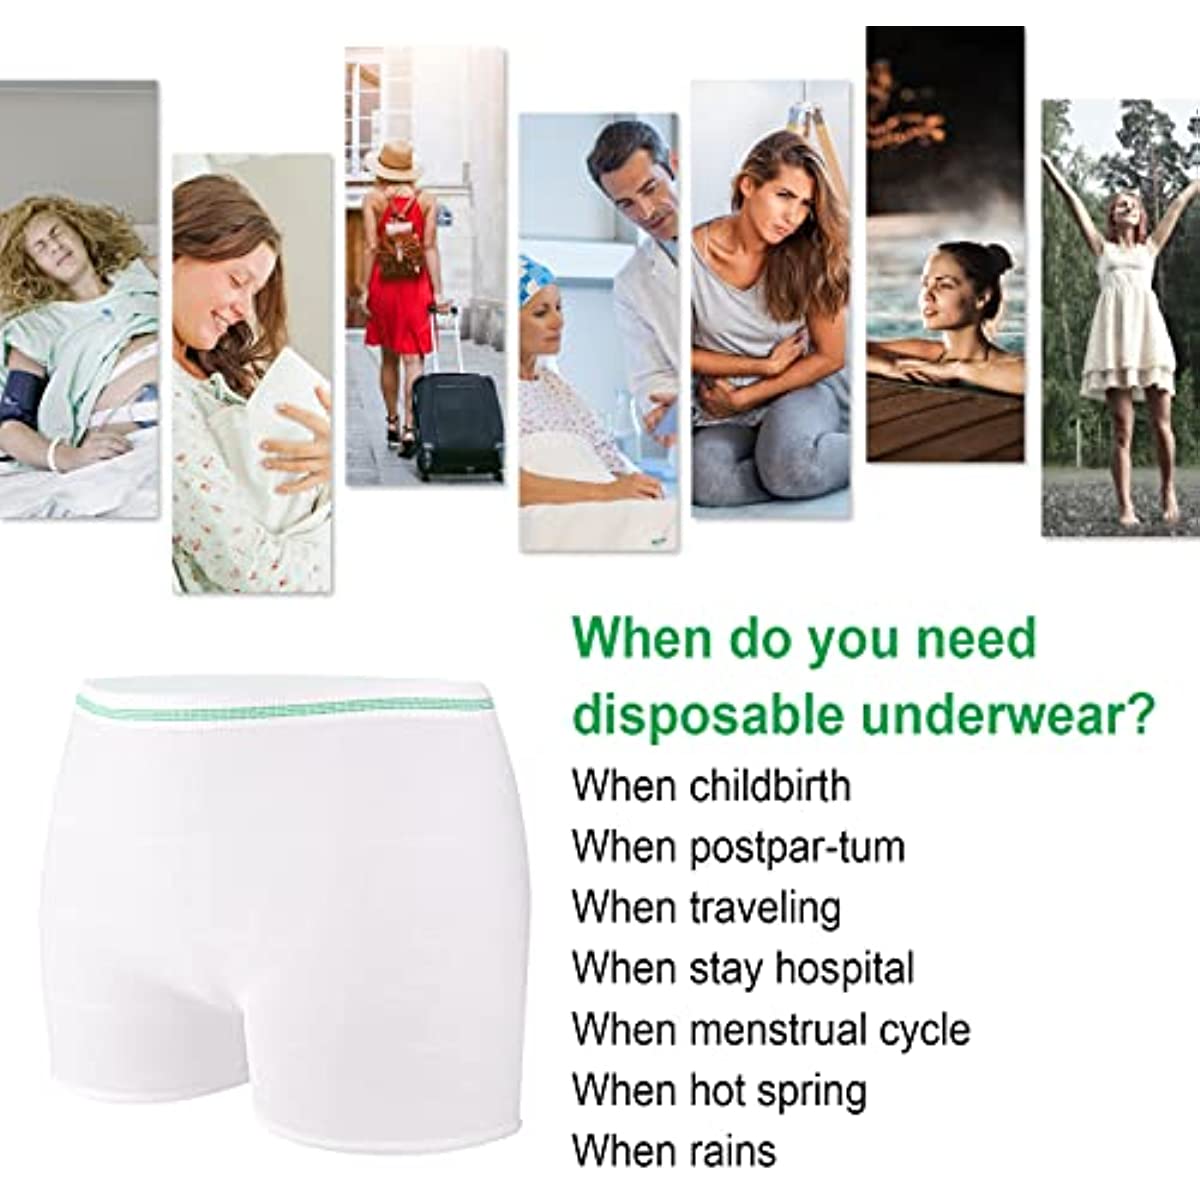 carer_live has the perfect mesh underwear for postpartum! They also h